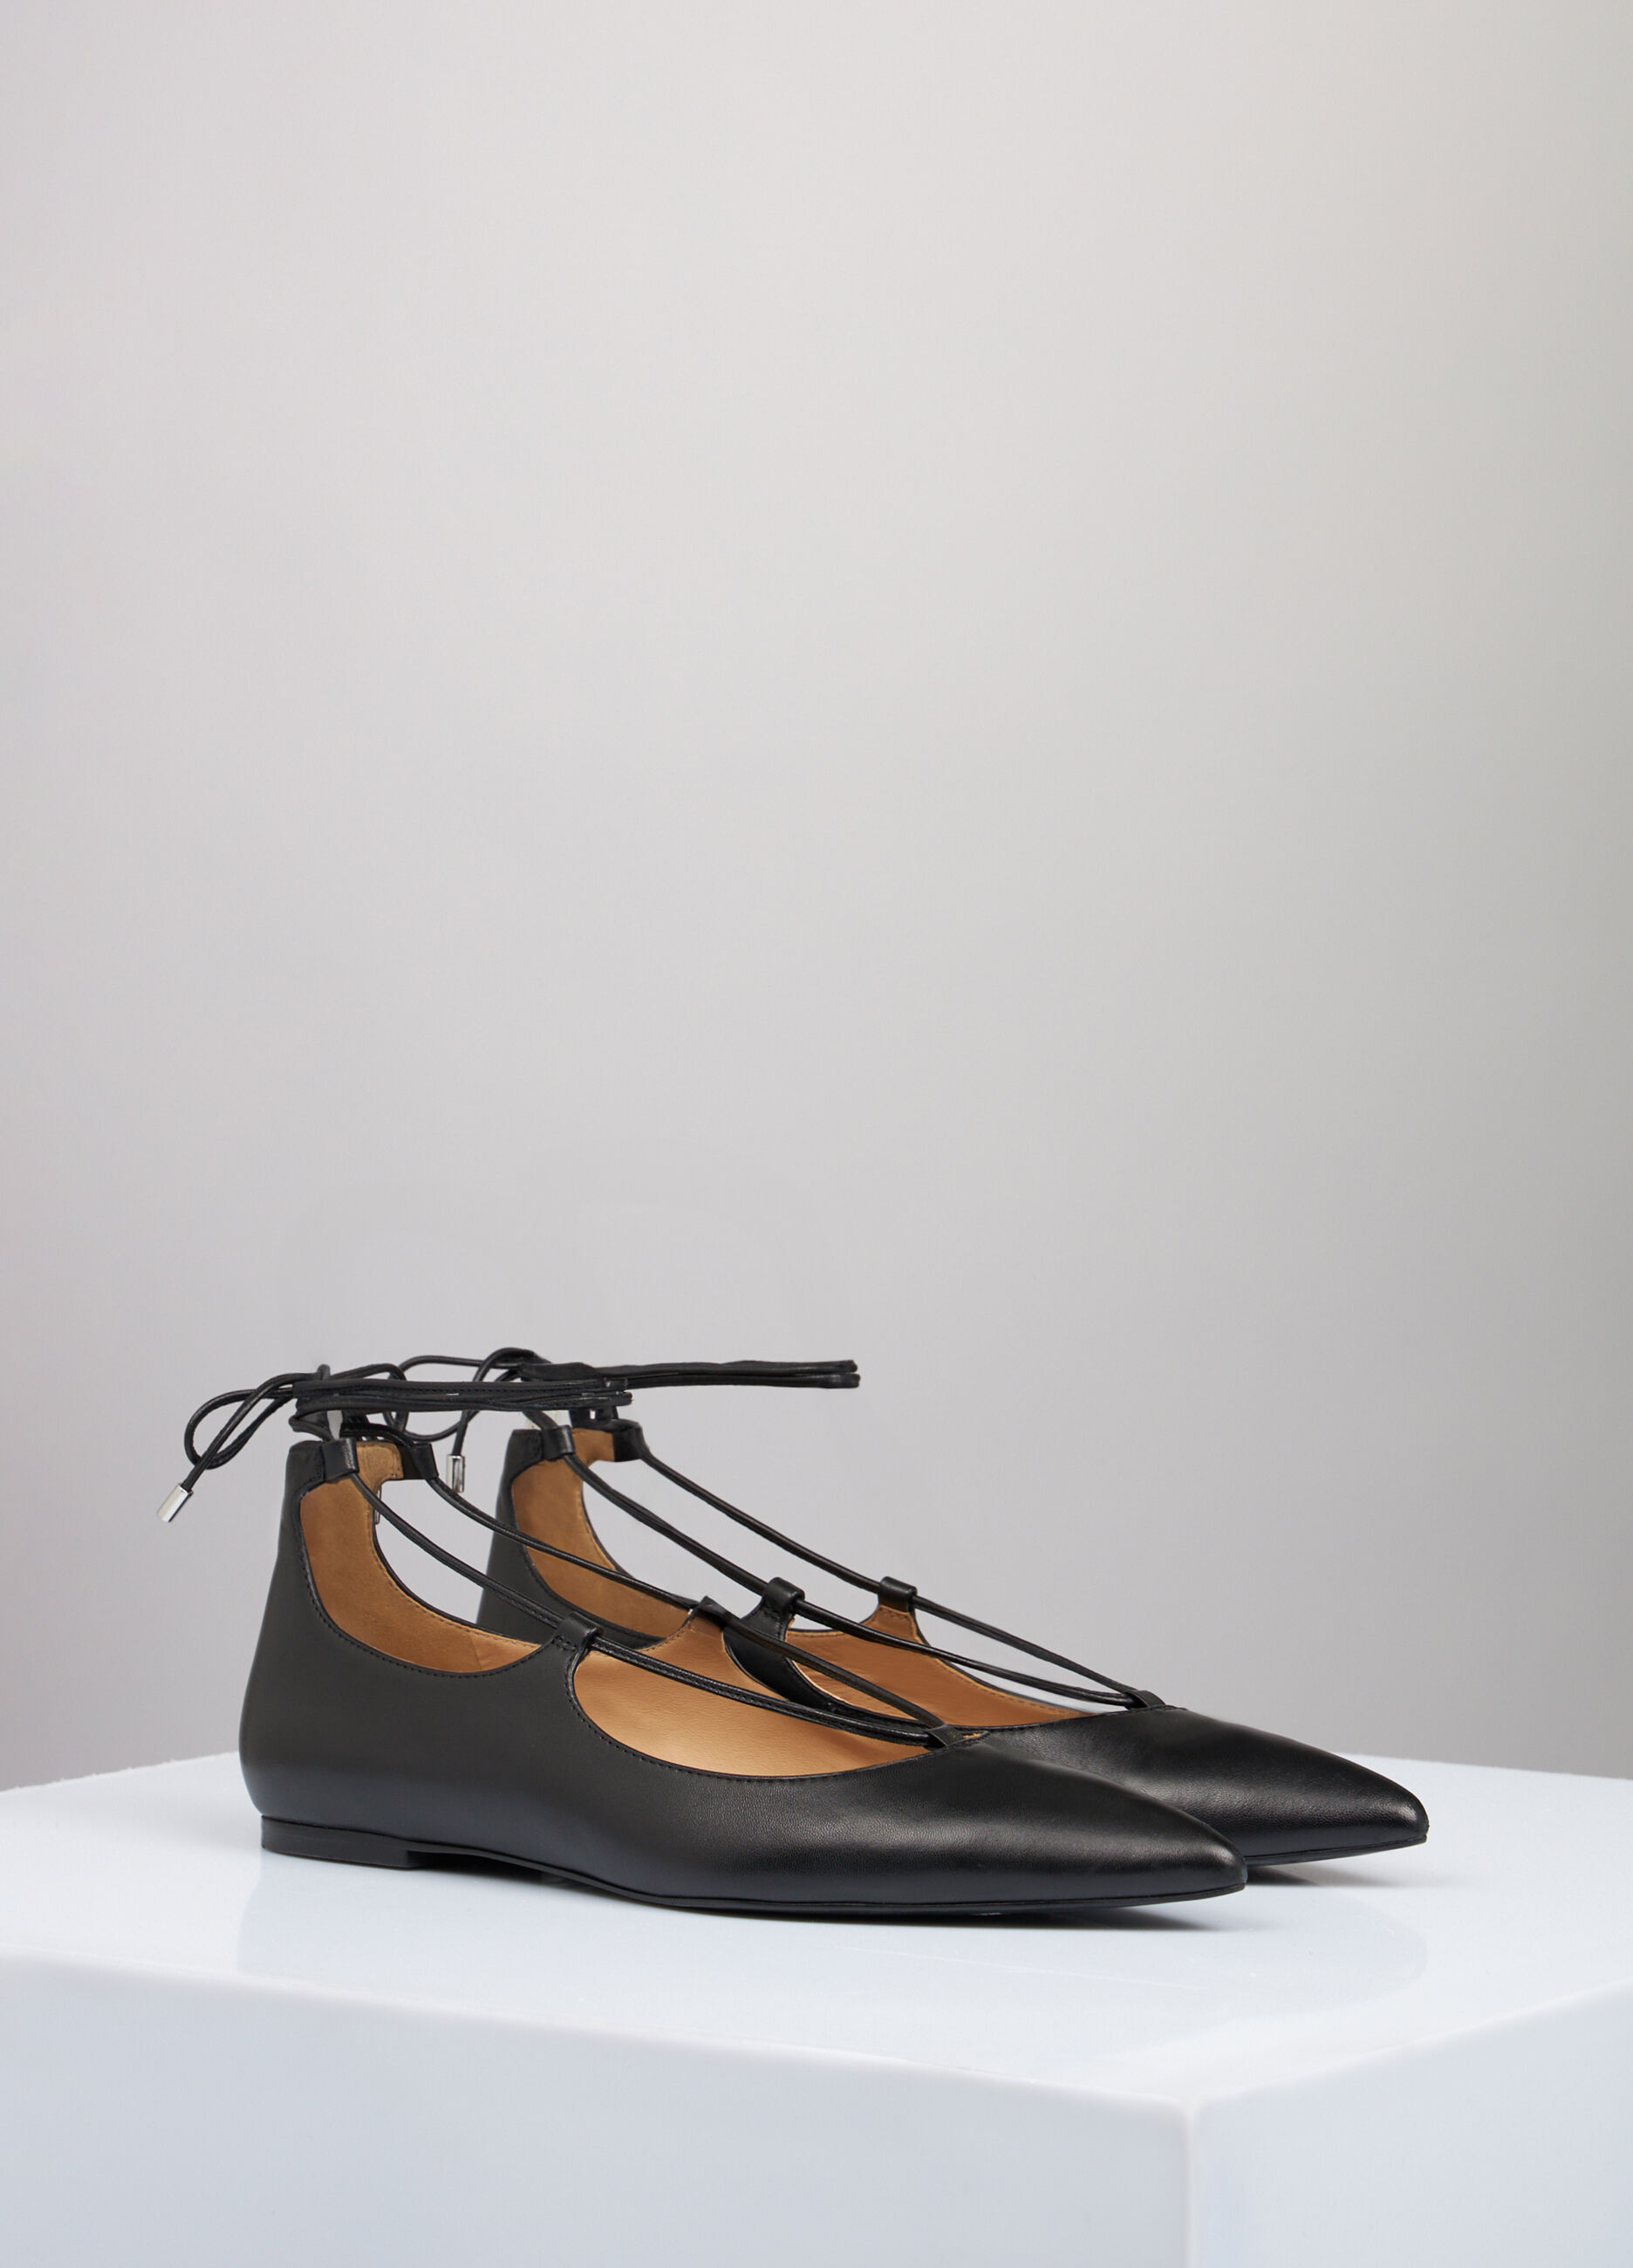 Real leather ballerina pumps with laces